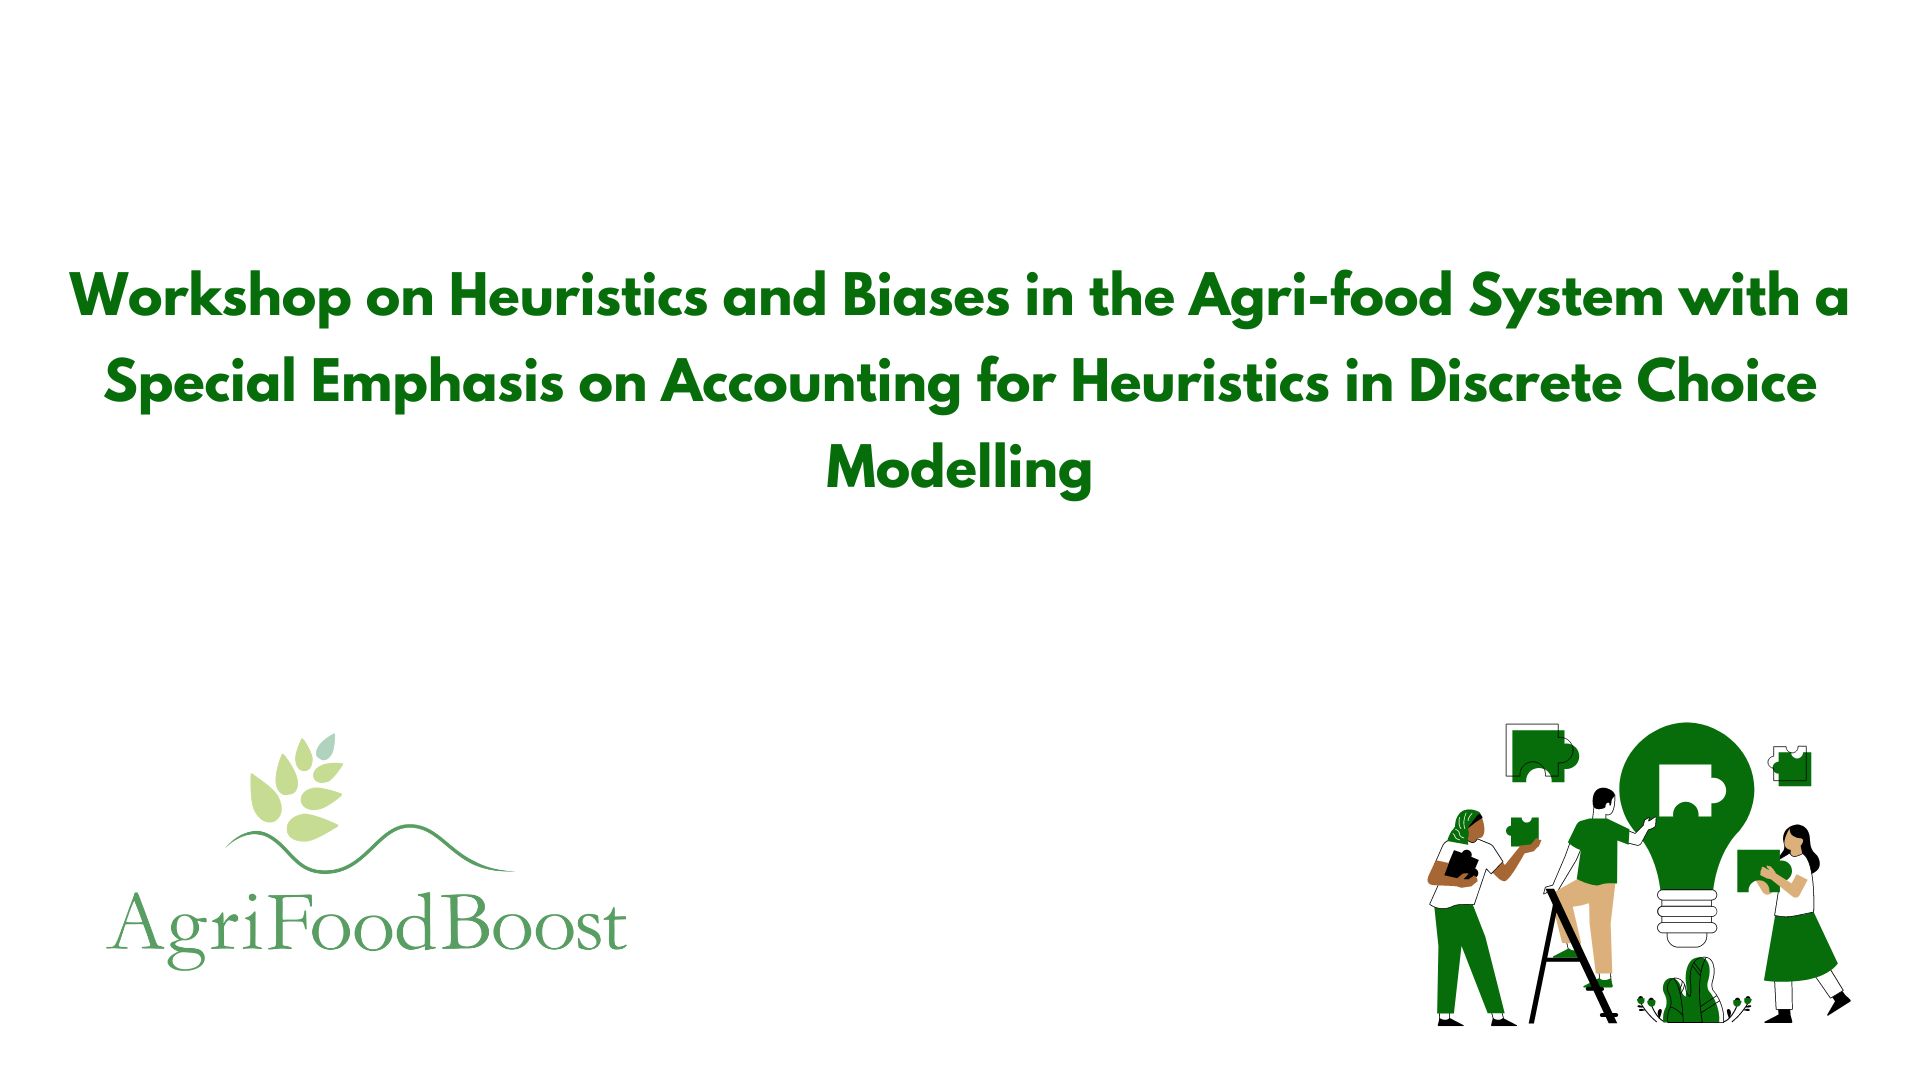 Workshop on Heuristics and Biases in the Agri-food System with a Special Emphasis on Accounting for Heuristics in Discrete Choice Modelling